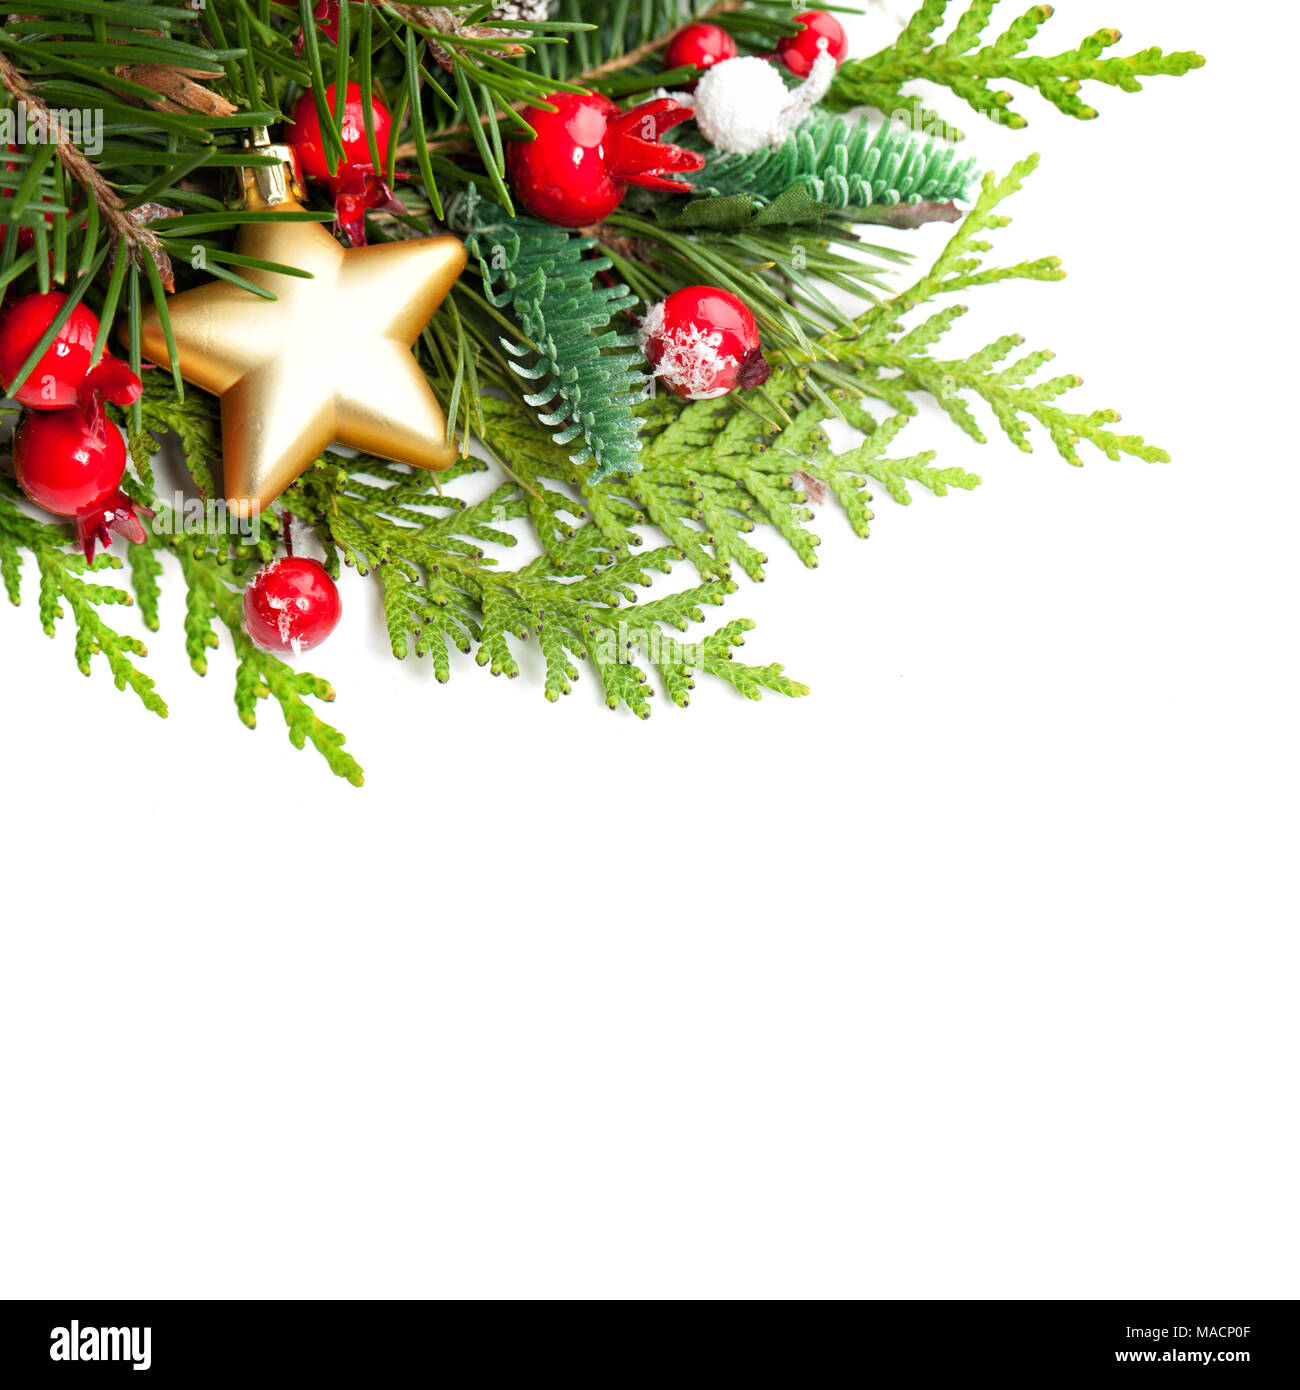 Christmas Background with Red Holly Berries, Xmas Tree Twig and Golden Star on White Background with Copy Space Stock Photo